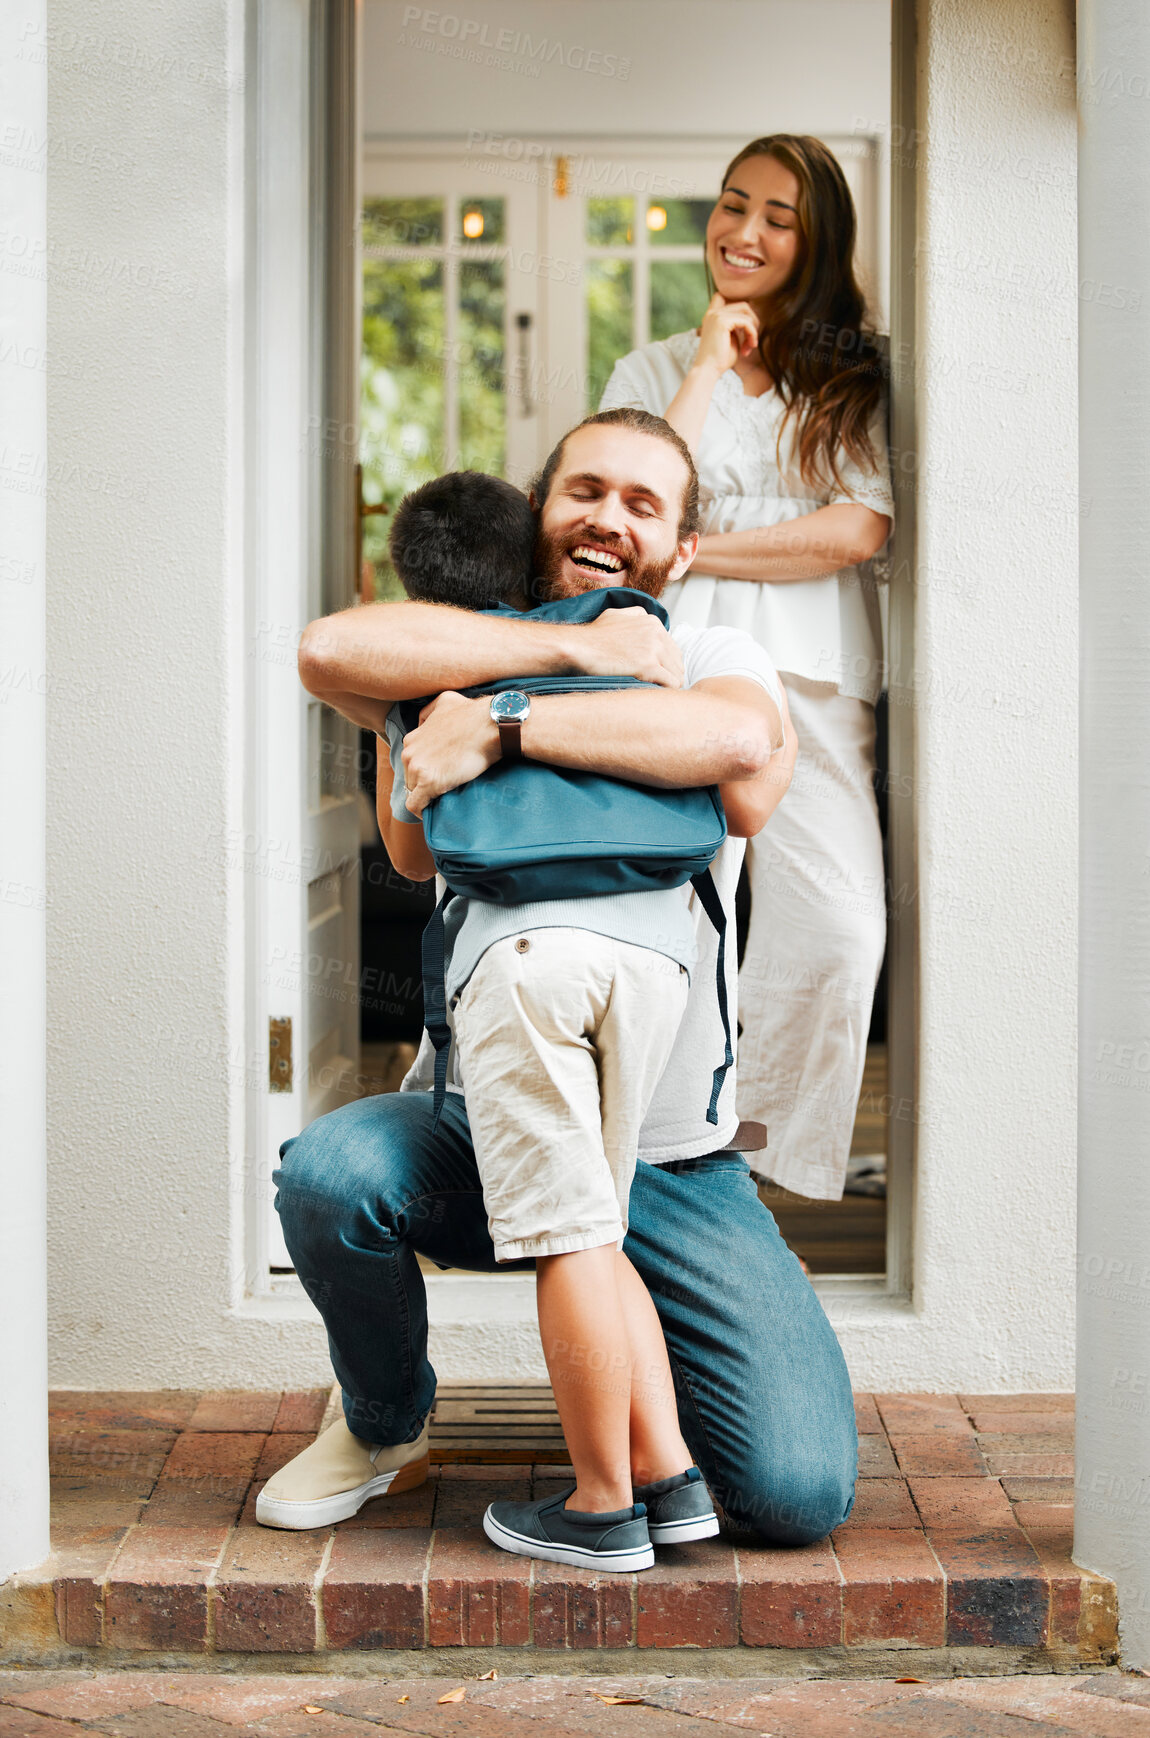 Buy stock photo Loving dad hug and embrace son, love from father to son or parents saying goodbye to child on front porch at home. Happy family greeting little boy with mother standing in doorway or house entrance.